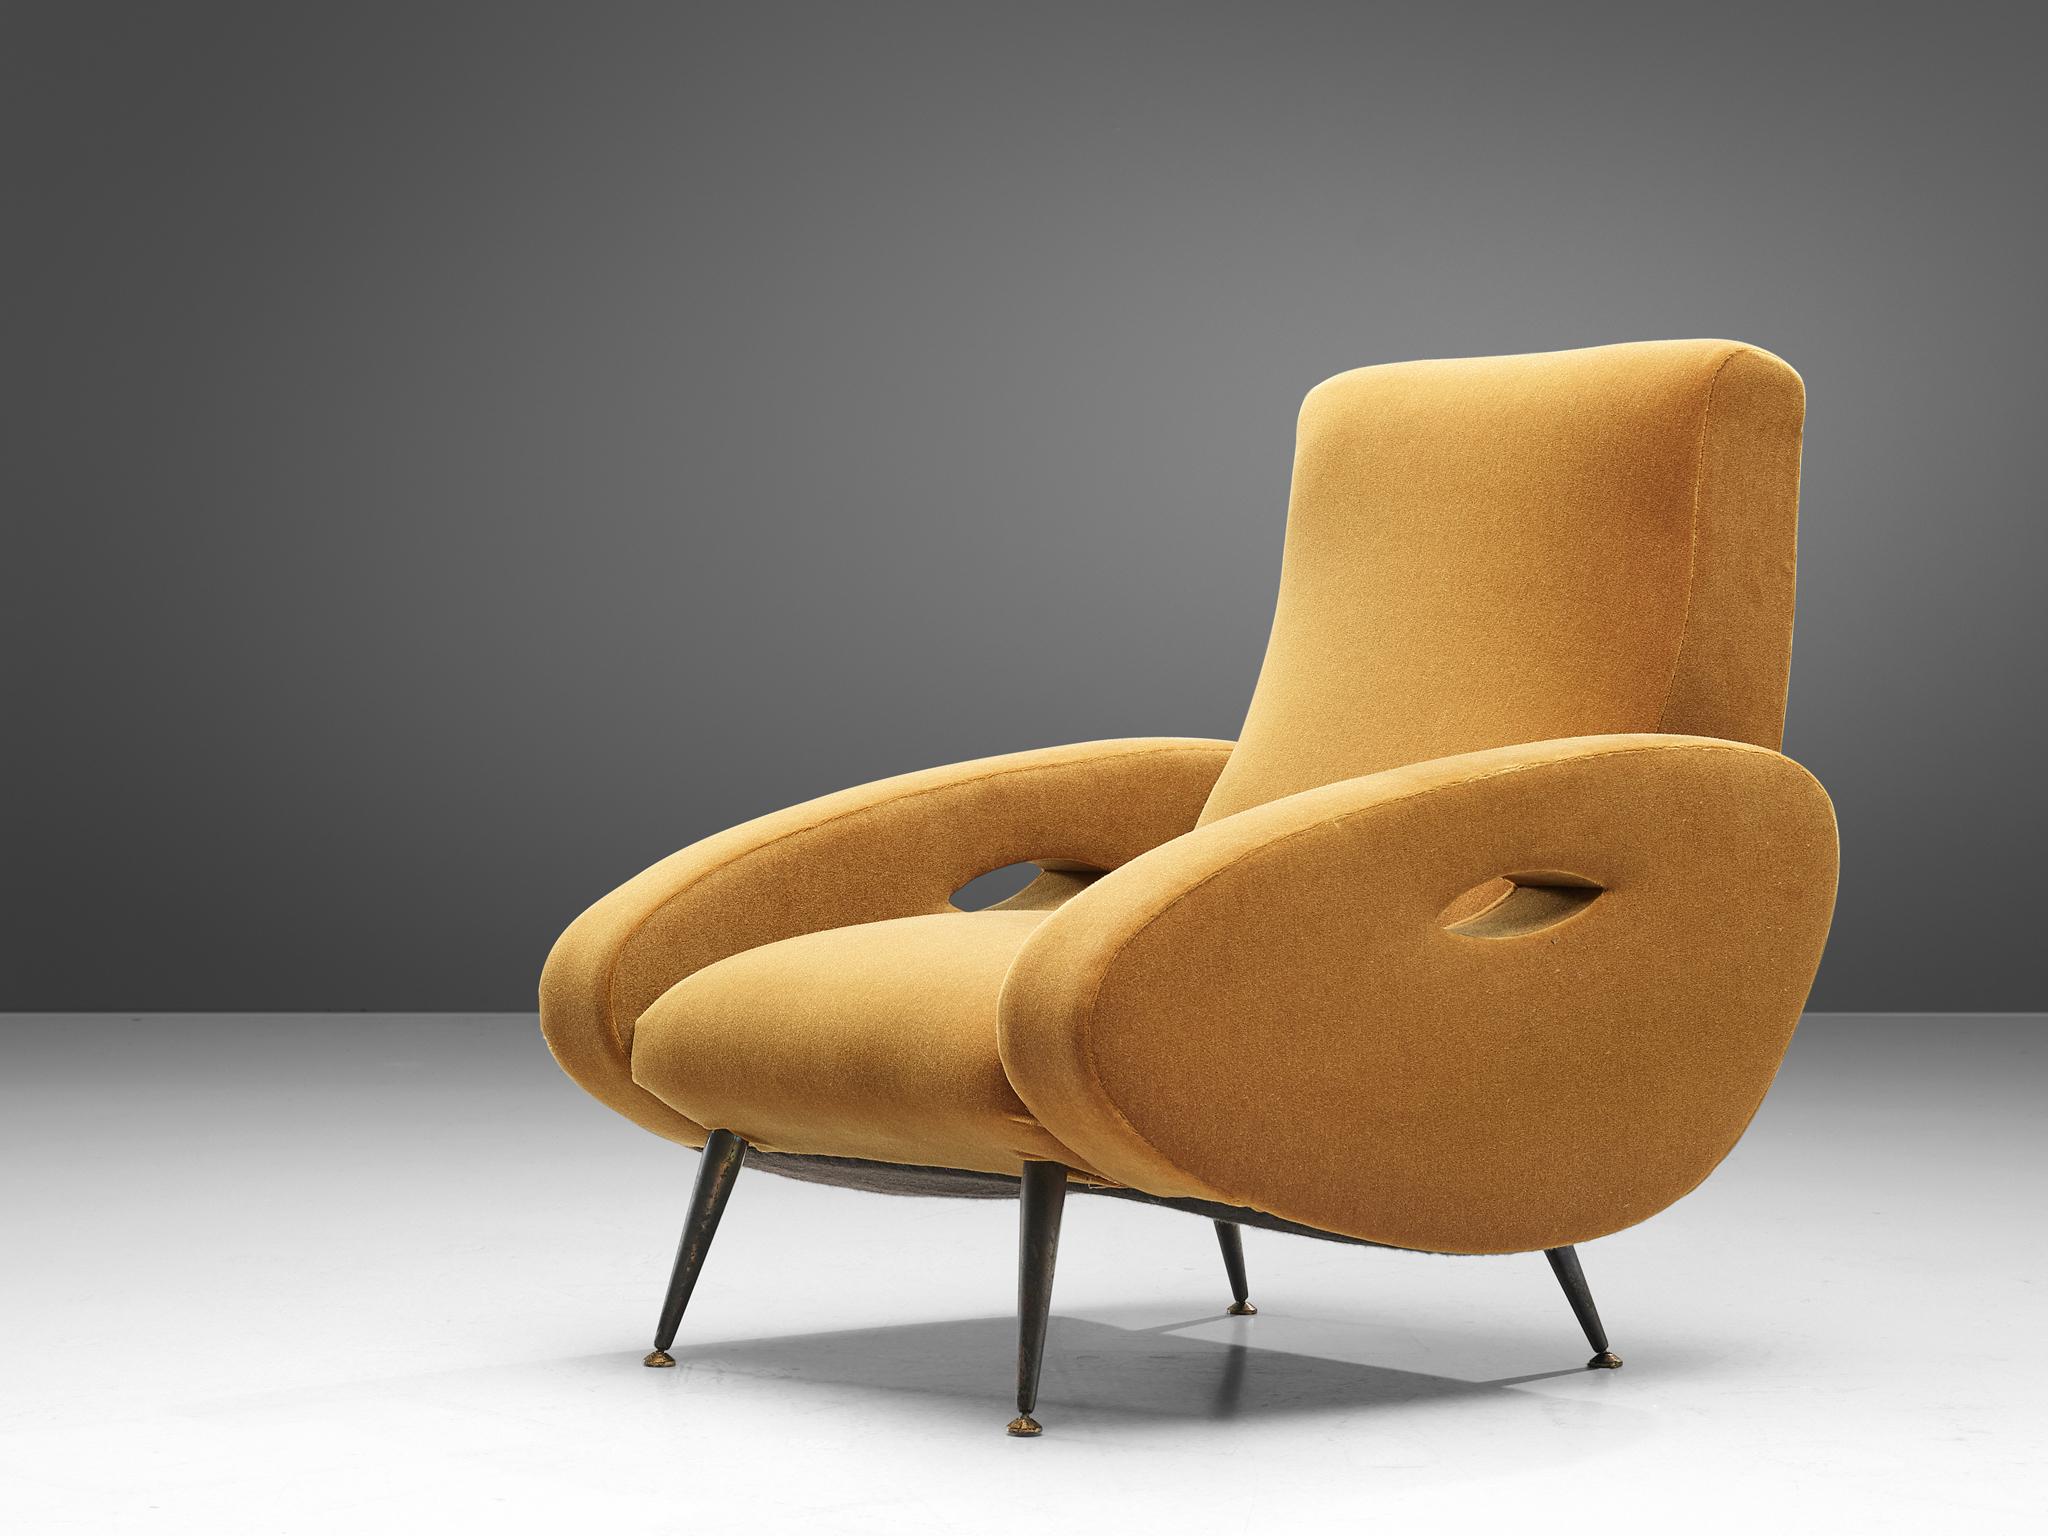 Francois Letourneur for Maurice Mourra, lounge chair, fabric and brass, France, 1950s

Lounge chair which shows a variety of well designed bold lines which provide each chair with an elegant look that reminds of the American streamlined designs. The